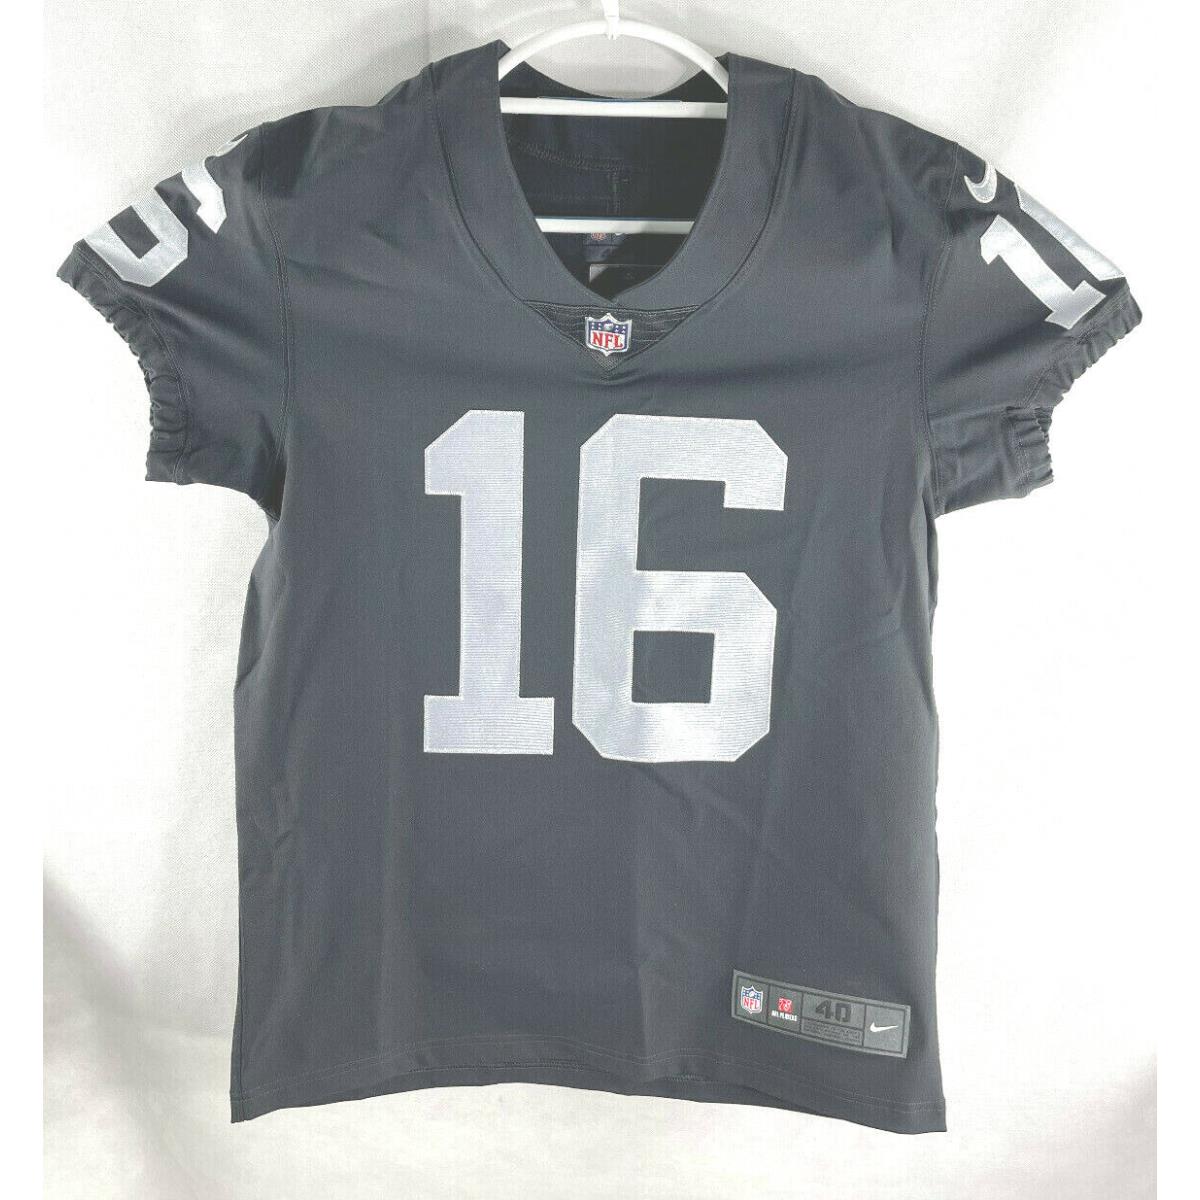 Nike On-field Nfl Size 40 Las Vegas Raiders Stitched Jersey 16 57NM-OREH